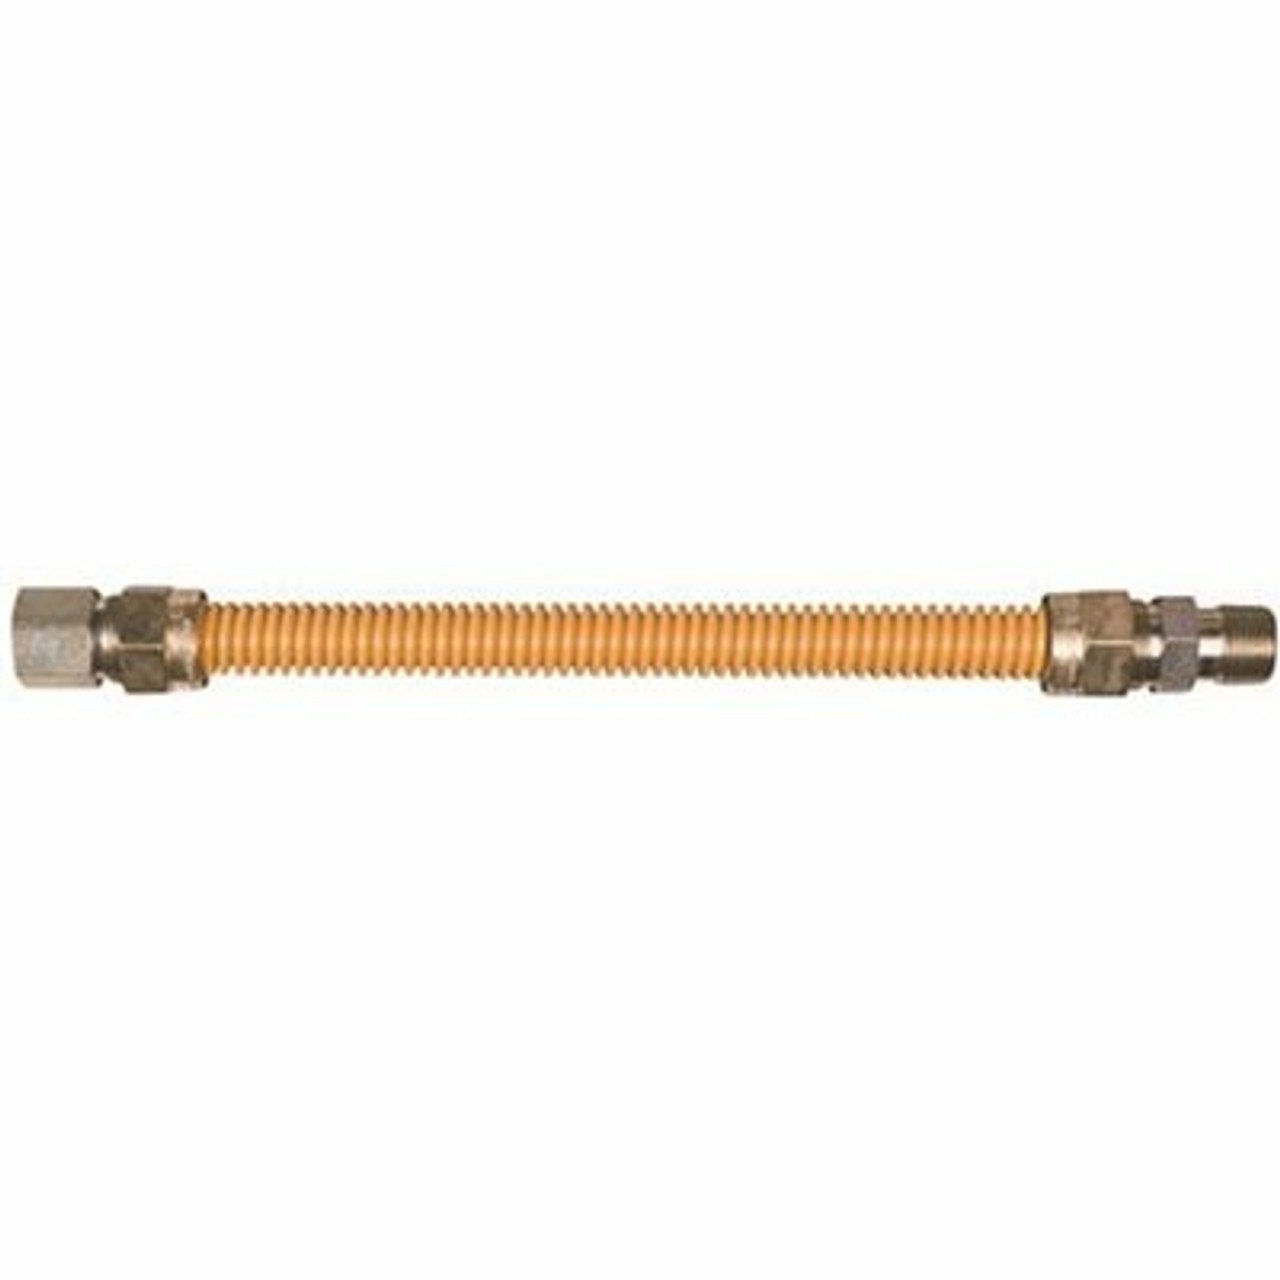 Watts Stainless Steel Gas Appliance Connector, Yellow Coated, 5/8 In. Od, 1/2 In. Id, 1/2 In. Mnpt X 1/2 In. Mnpt, 48 In. L